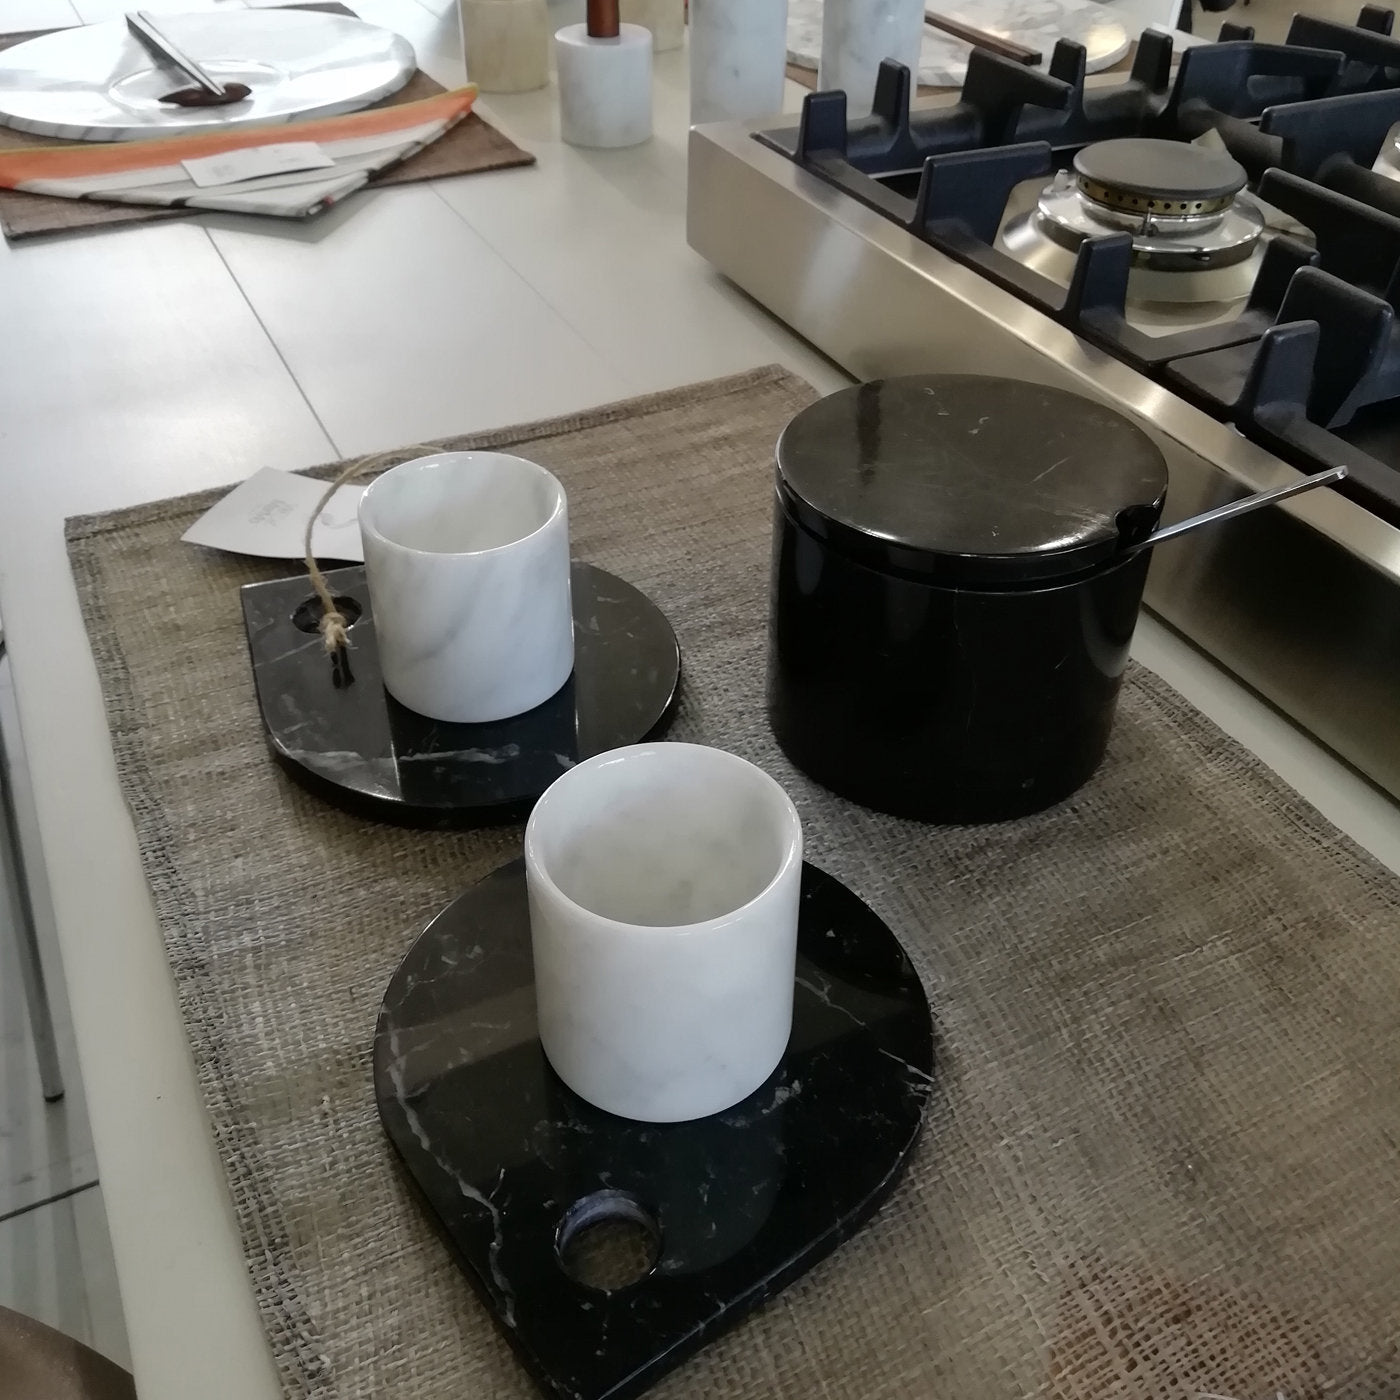 Set of 2 Espresso Cups and Saucers - Alternative view 3